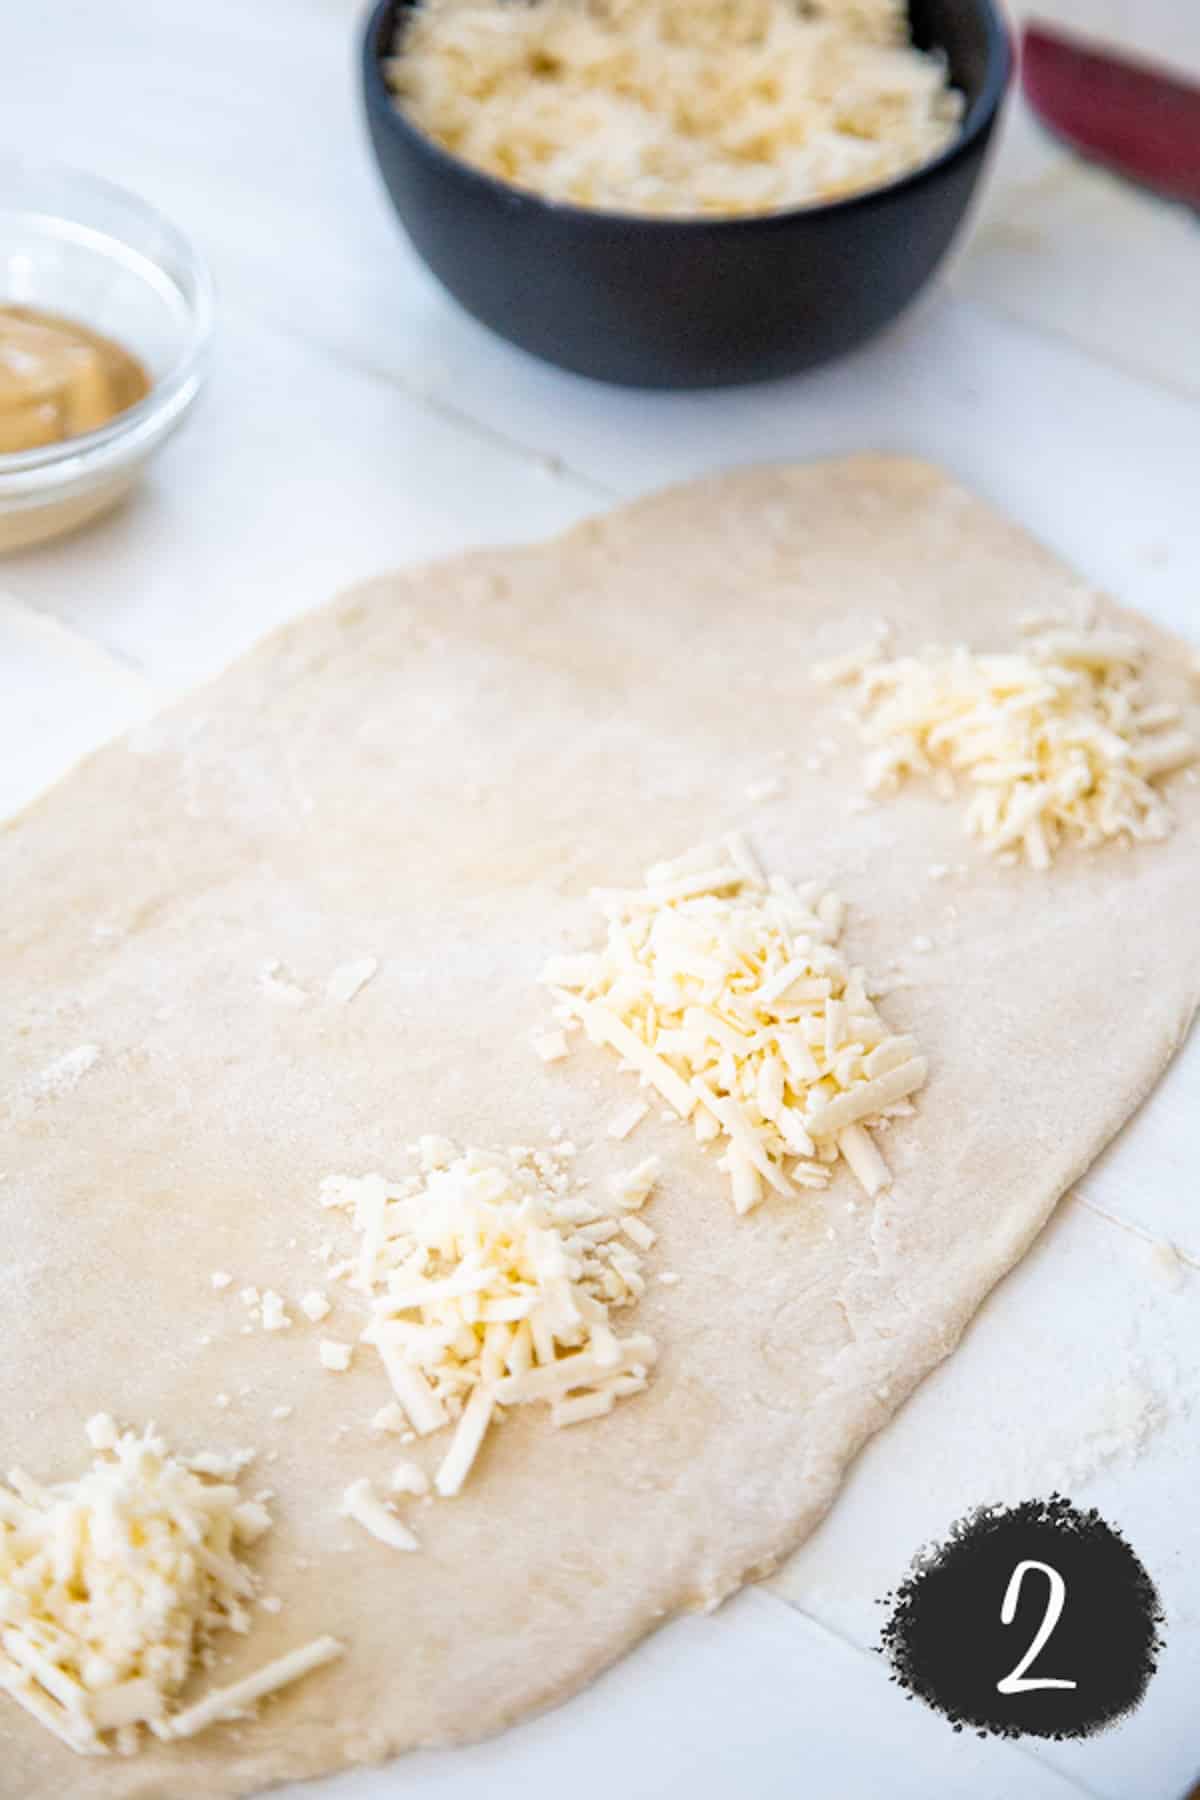 Pizza dough rolled into a long strip with Dollops of shredded white cheese.